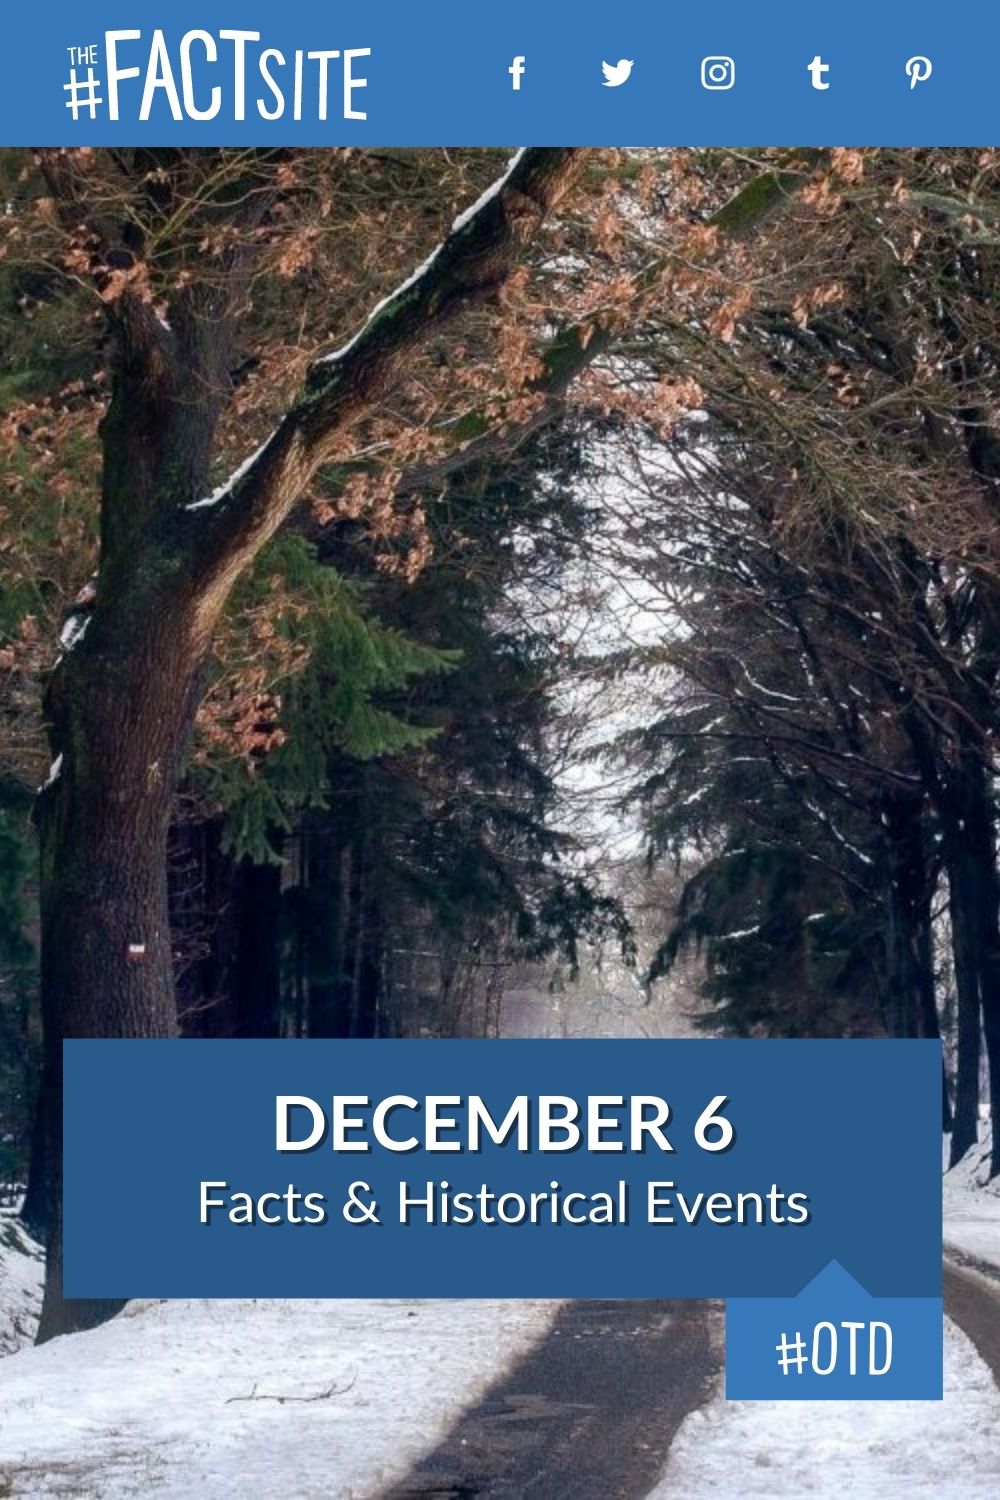 Facts & Historic Events That Happened on December 6